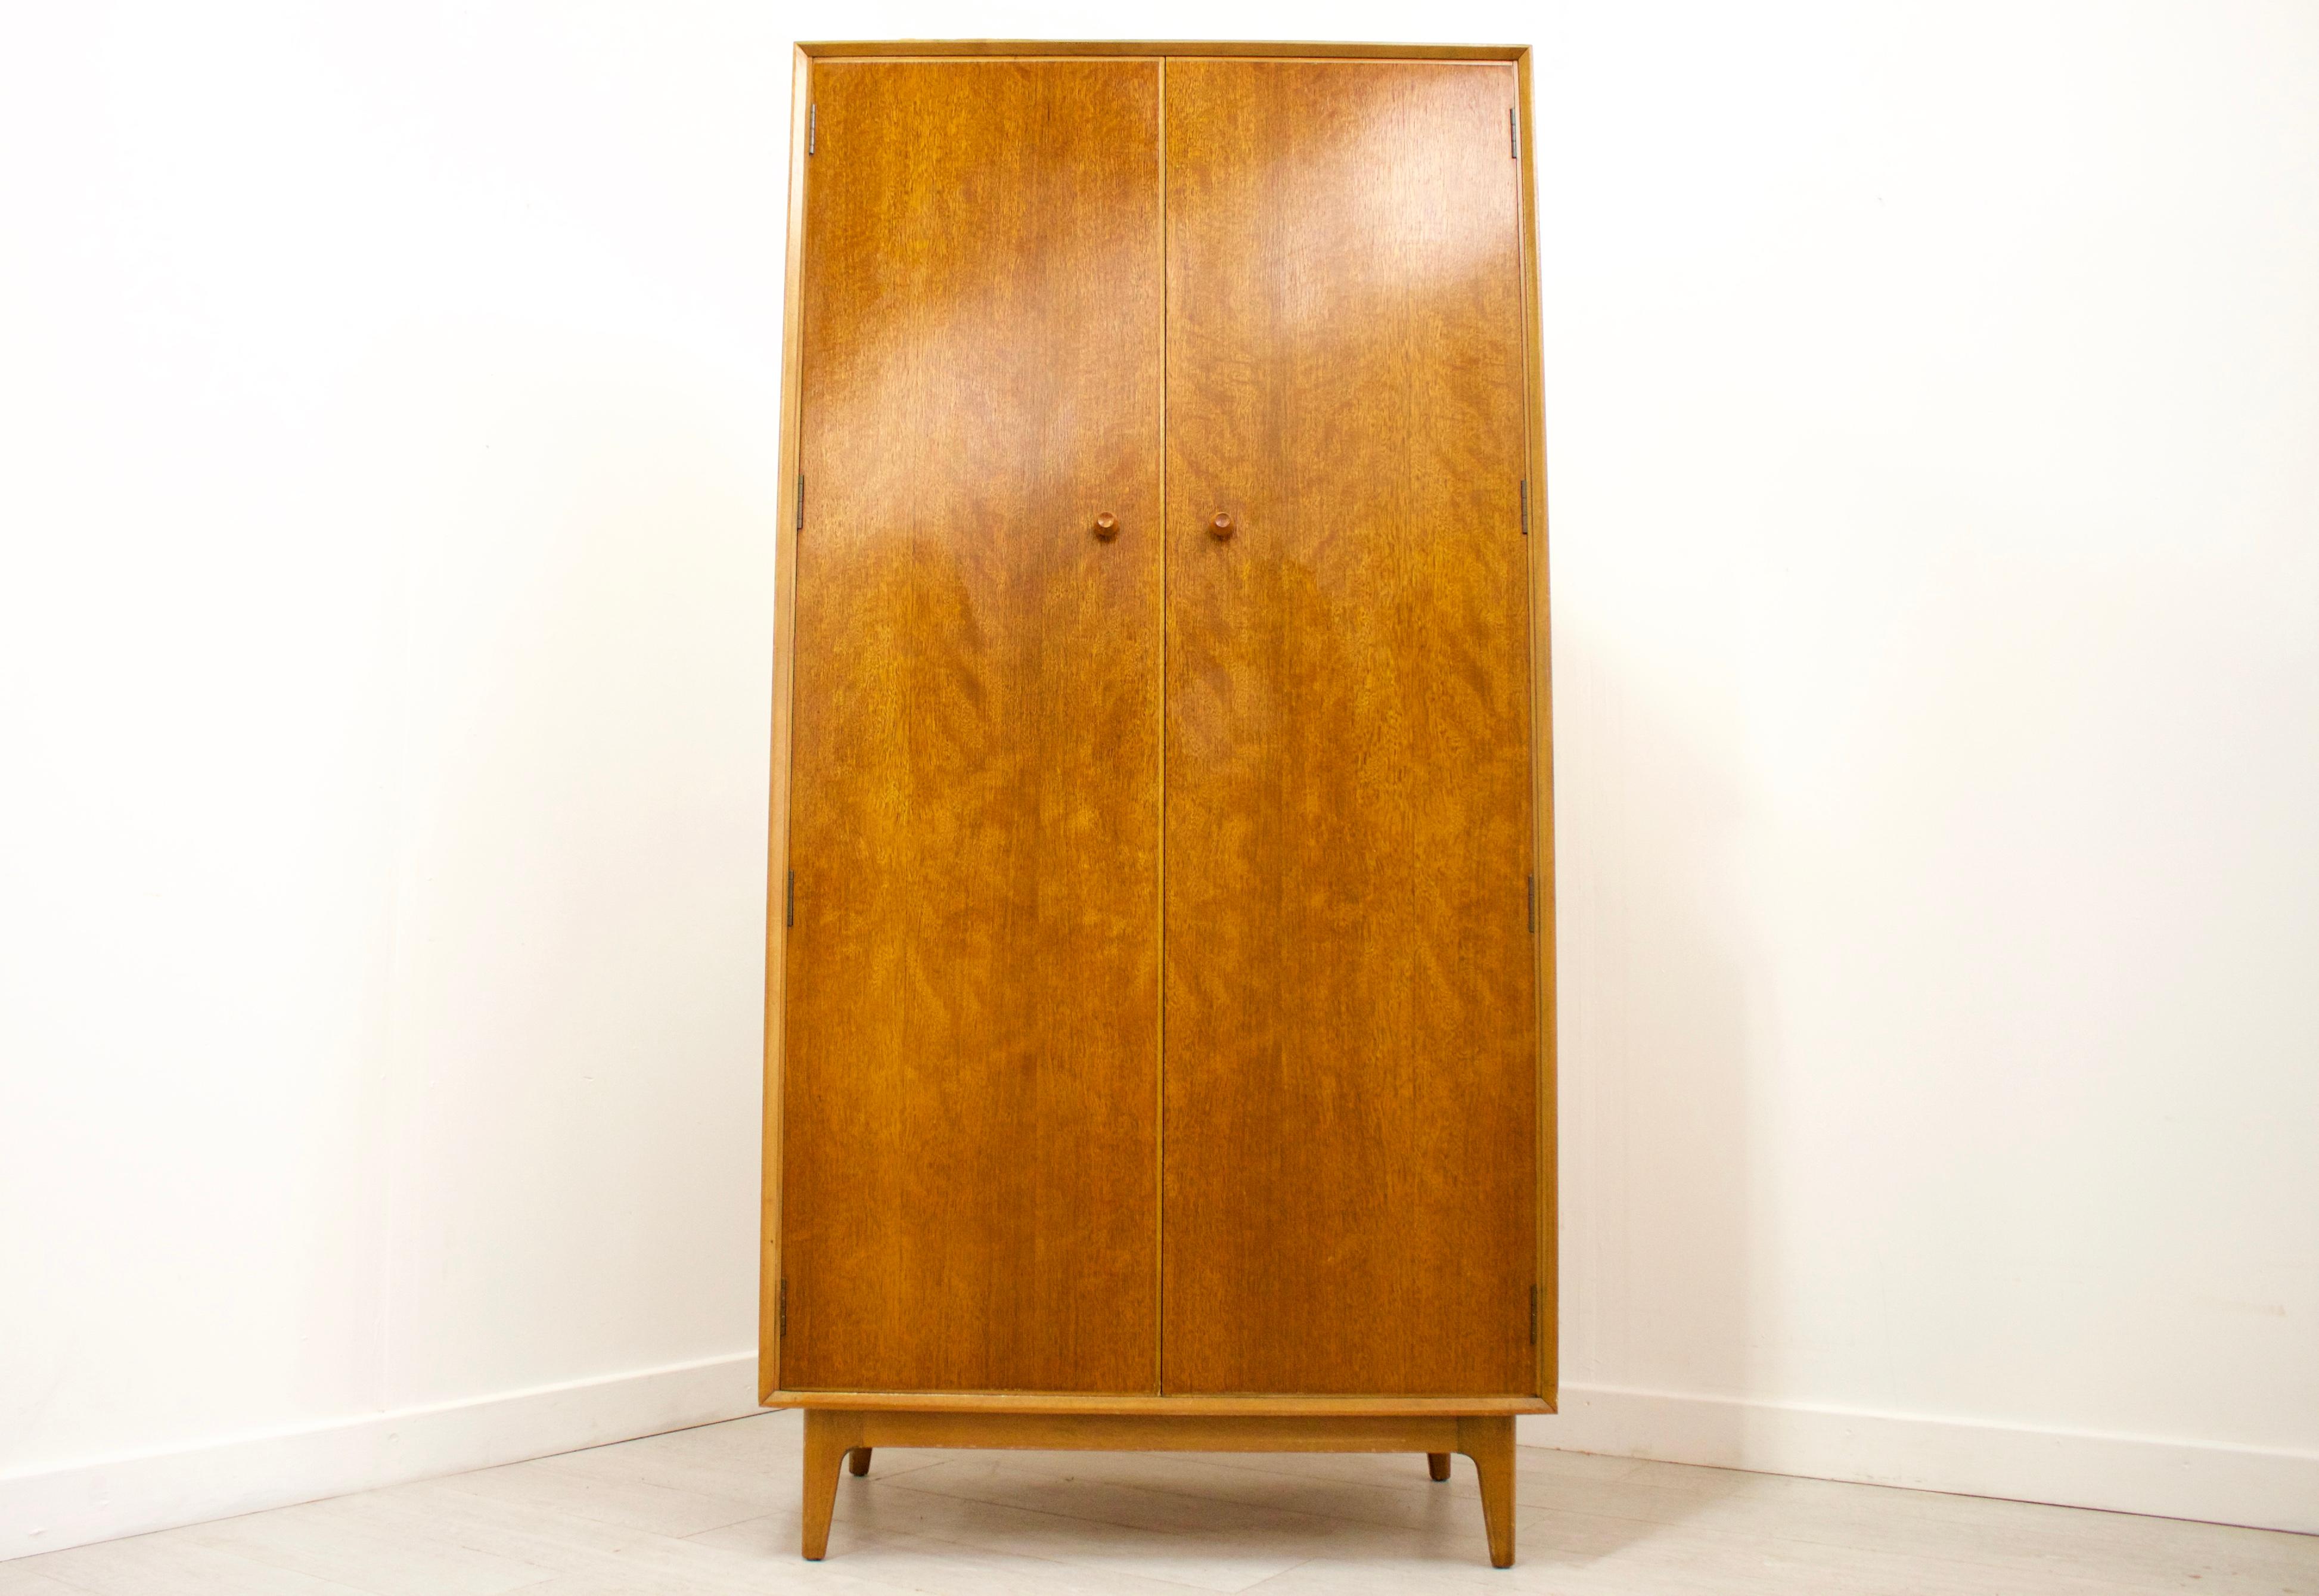 This is a very stylish solid teak and walnut veneer wardrobe by Gimson & Slater for Vesper.

This wardrobe features a hanging rail to the left side, and shelves to the right for ample storage. It also features a tie rack on the inside of the right